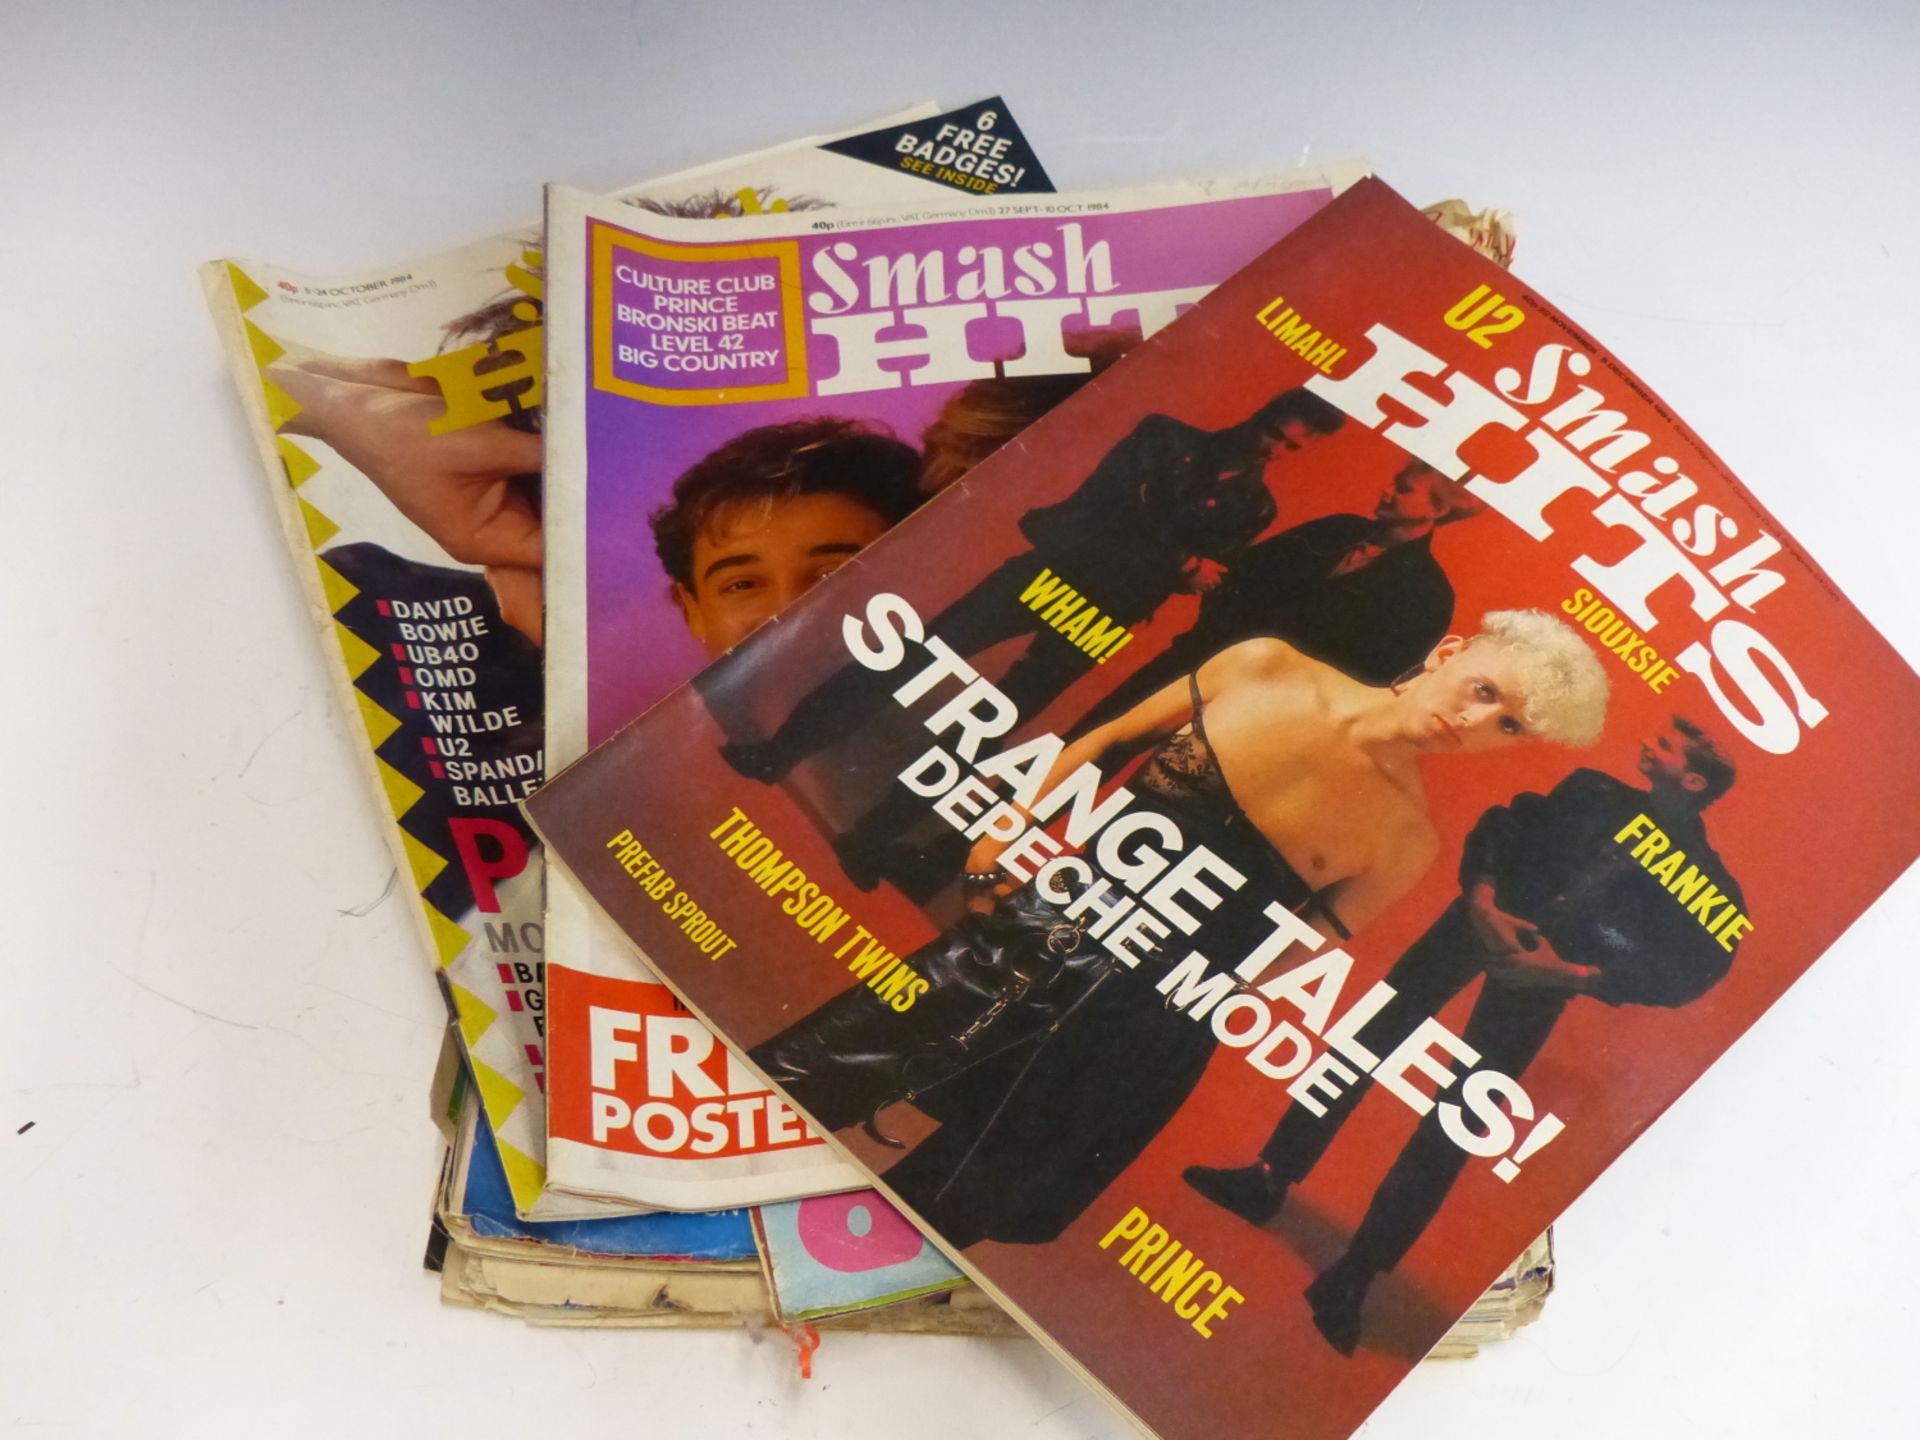 A COLLECTION OF VINTAGE 1980'S SMASH HITS MAGAZINES. - Image 3 of 4